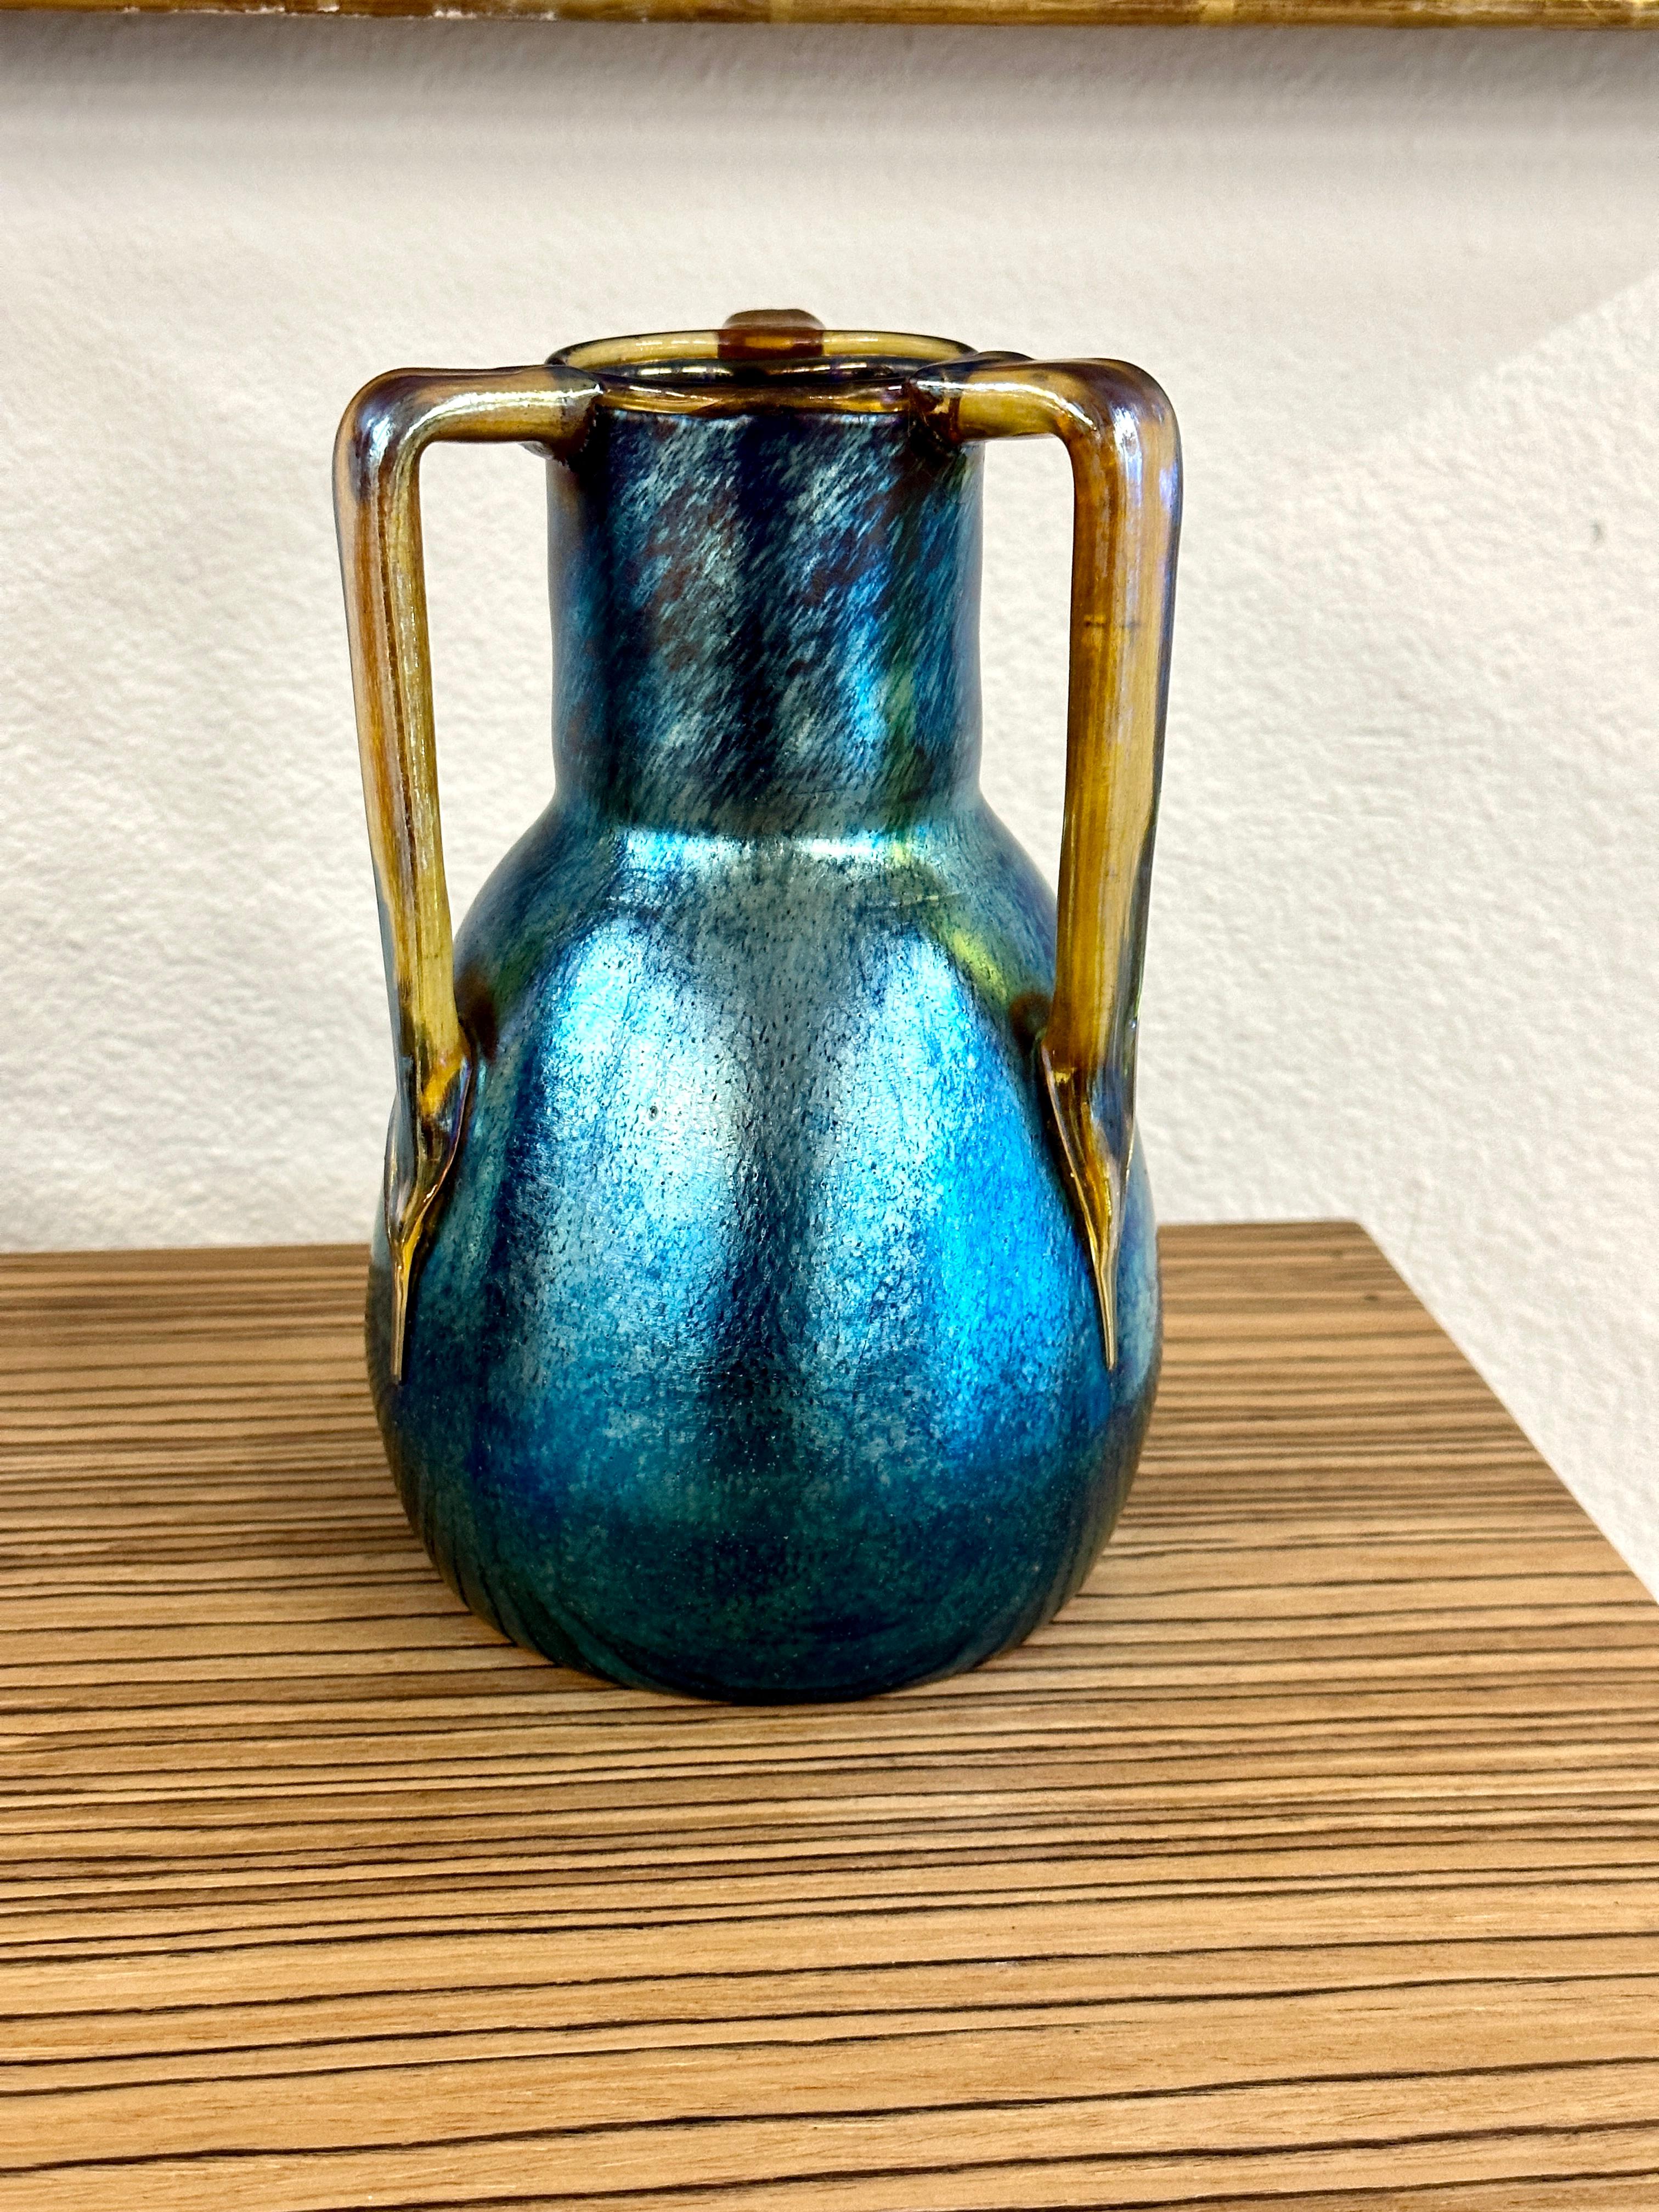 Beautiful Loetz iridescent glass three handled vase by Marie Kirschner. Lovely contrasting colors. Weve photographed it in different light to try and capture it's shimmer and beauty.
In good condition. A brief bio of the artist from the Loetz. com